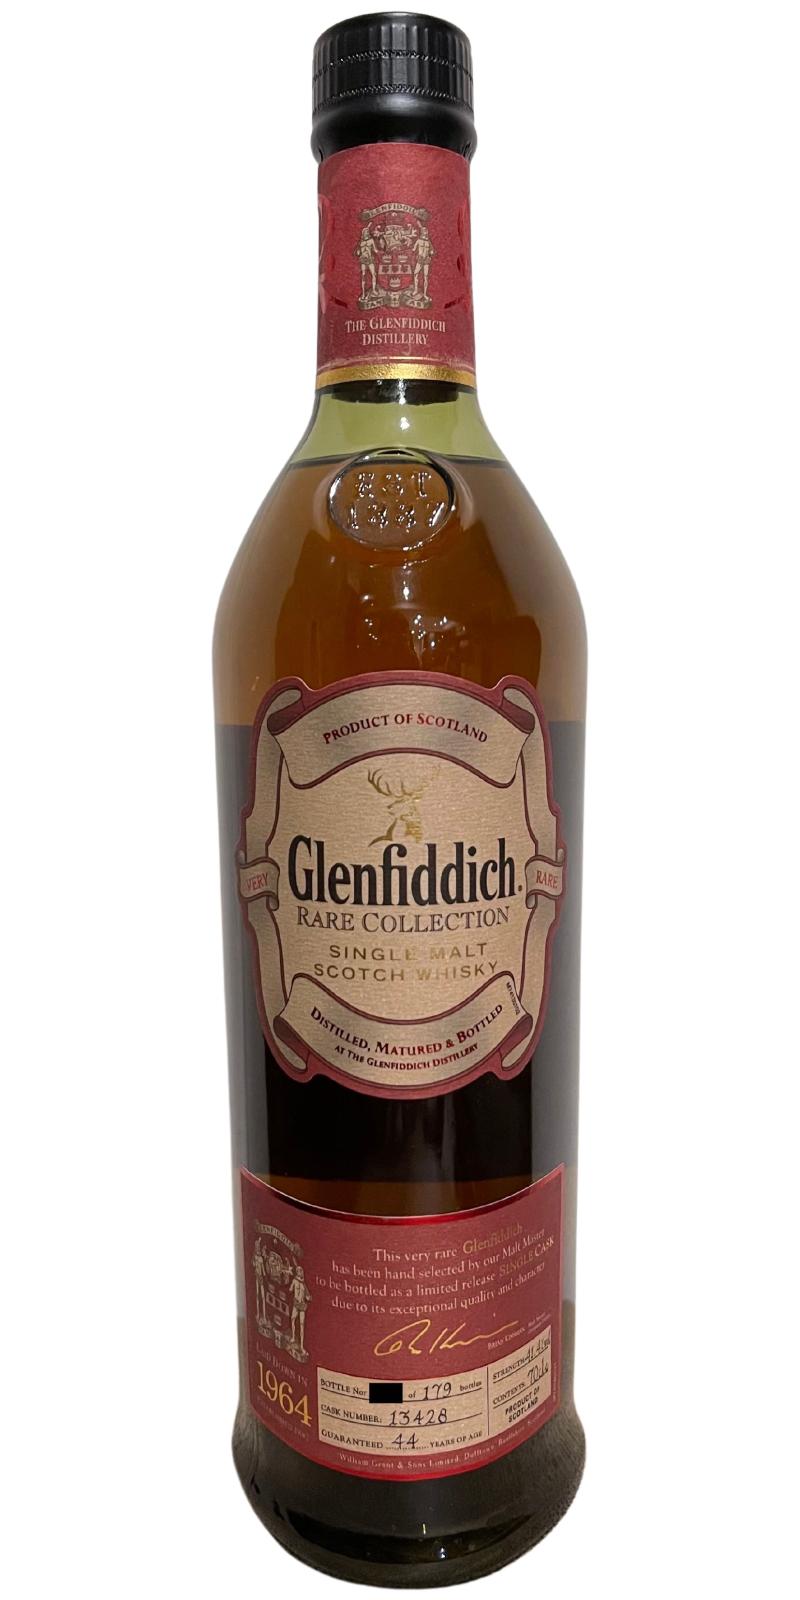 Glenfiddich 1964 Rare Collection Taiwan Duty Free Exclusive 41.4% 700ml